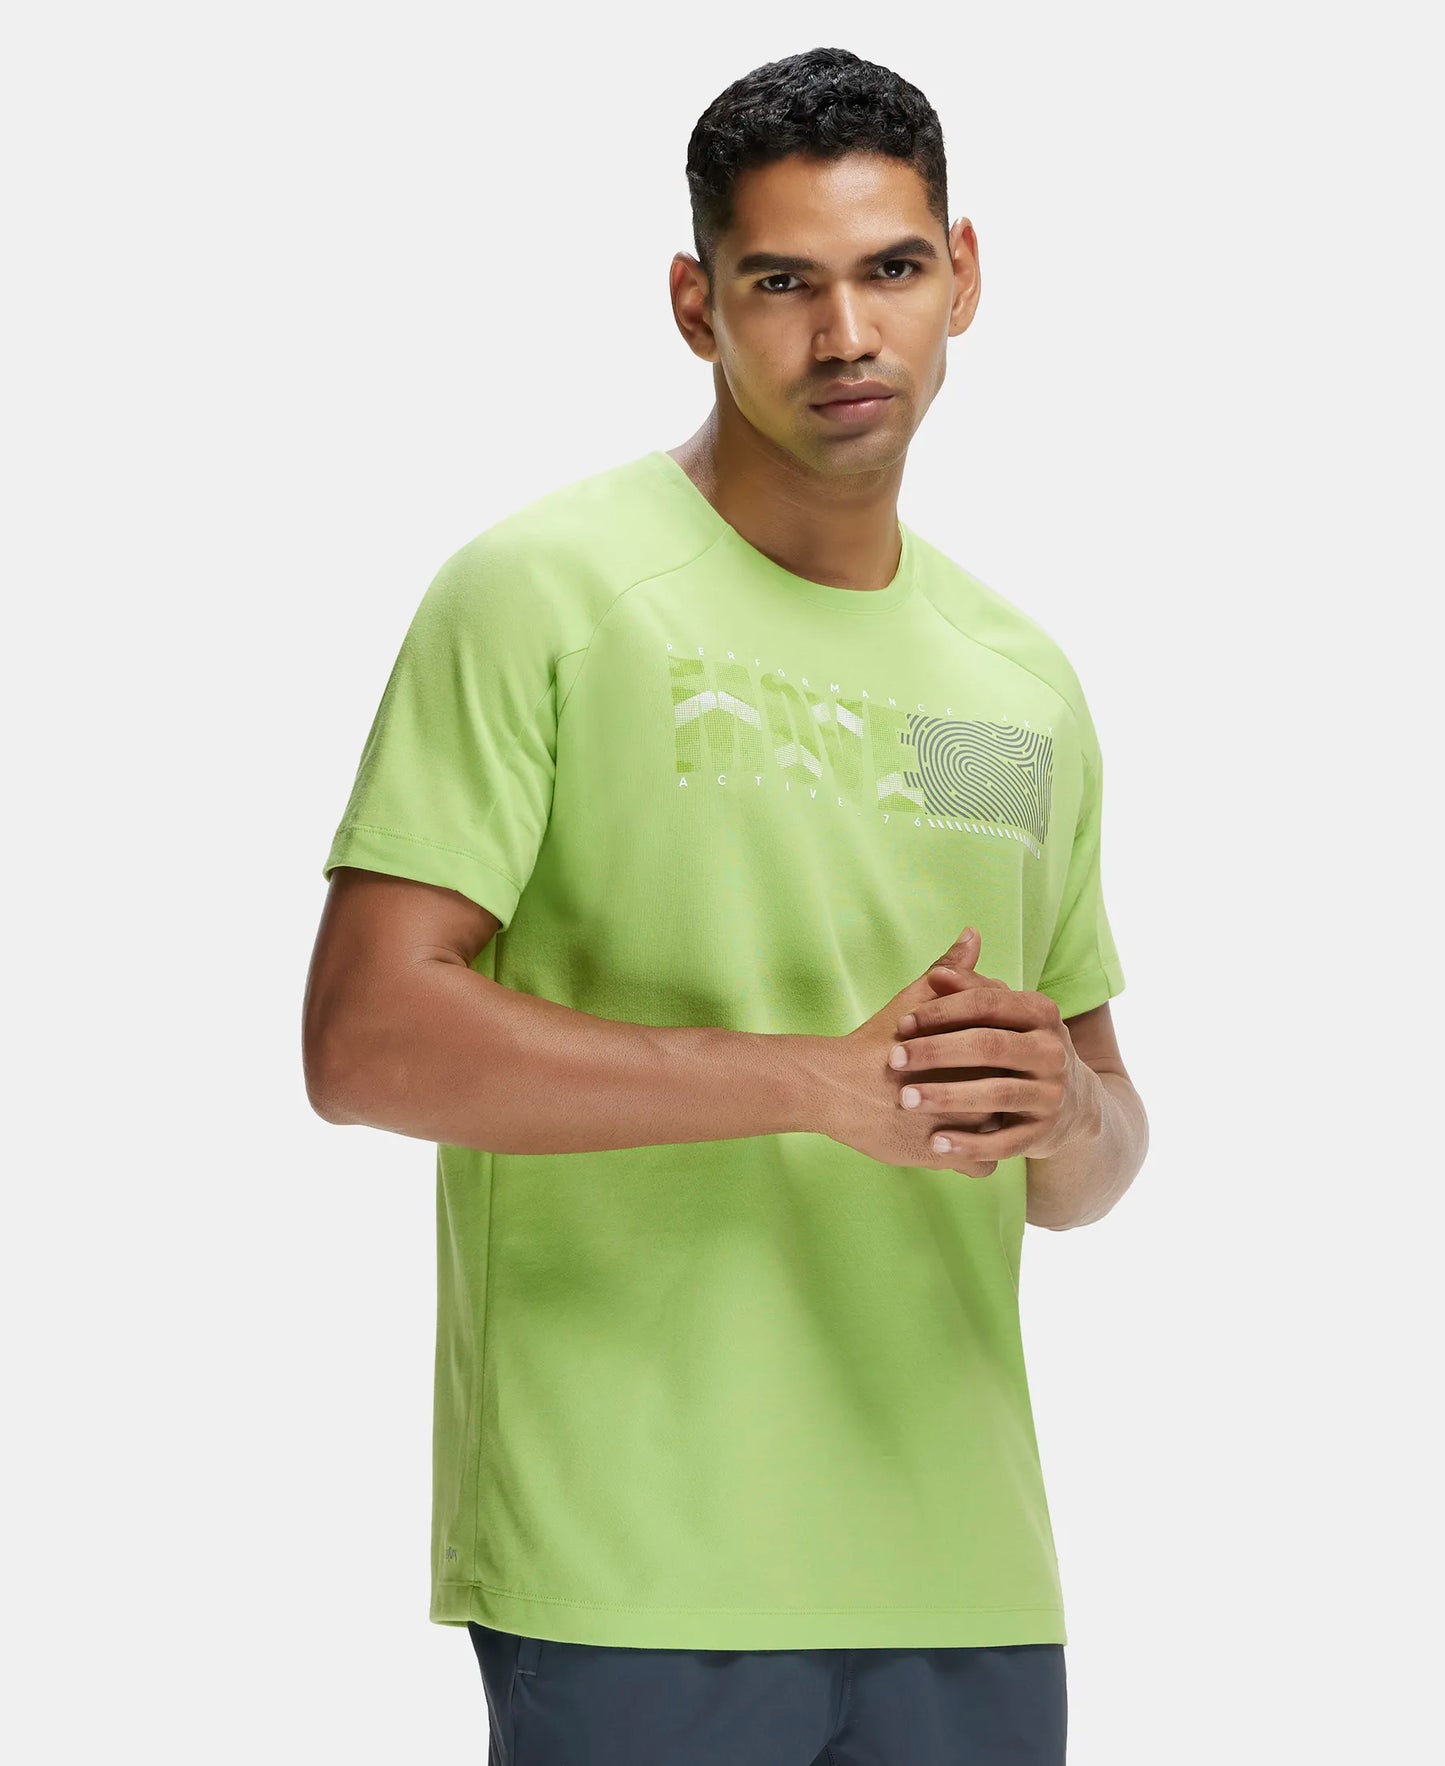 Super Combed Cotton Blend Graphic Printed Round Neck Half Sleeve T-Shirt with Stay Fresh Treatment - Green Glow-2